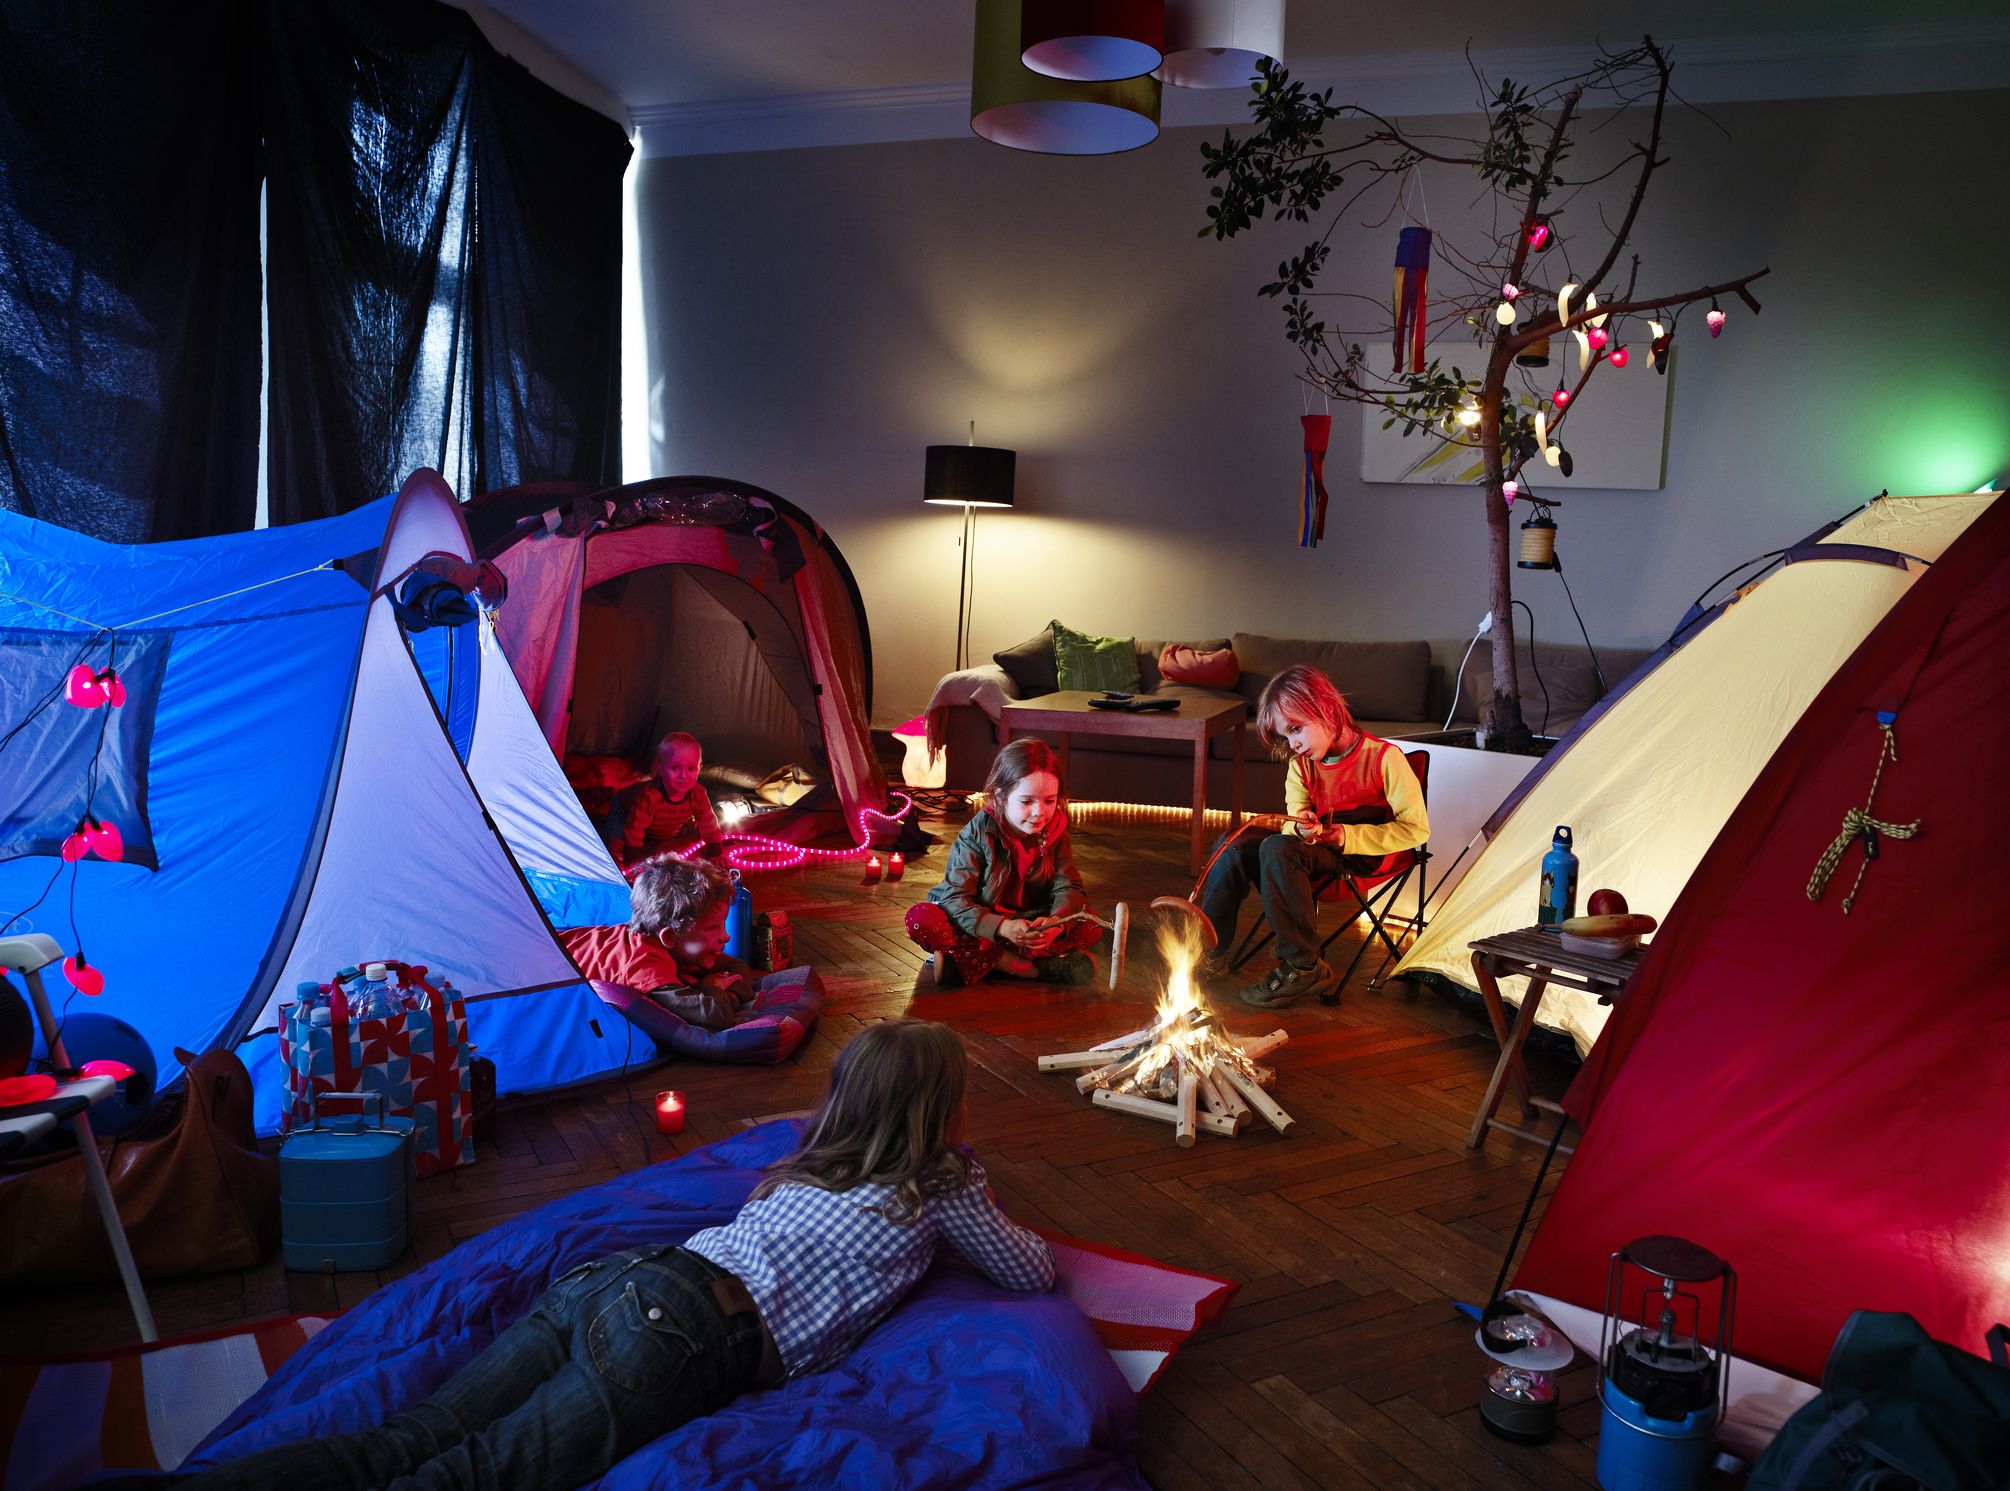 Indoor camping for kids (and big kids) – Family Friendly Working